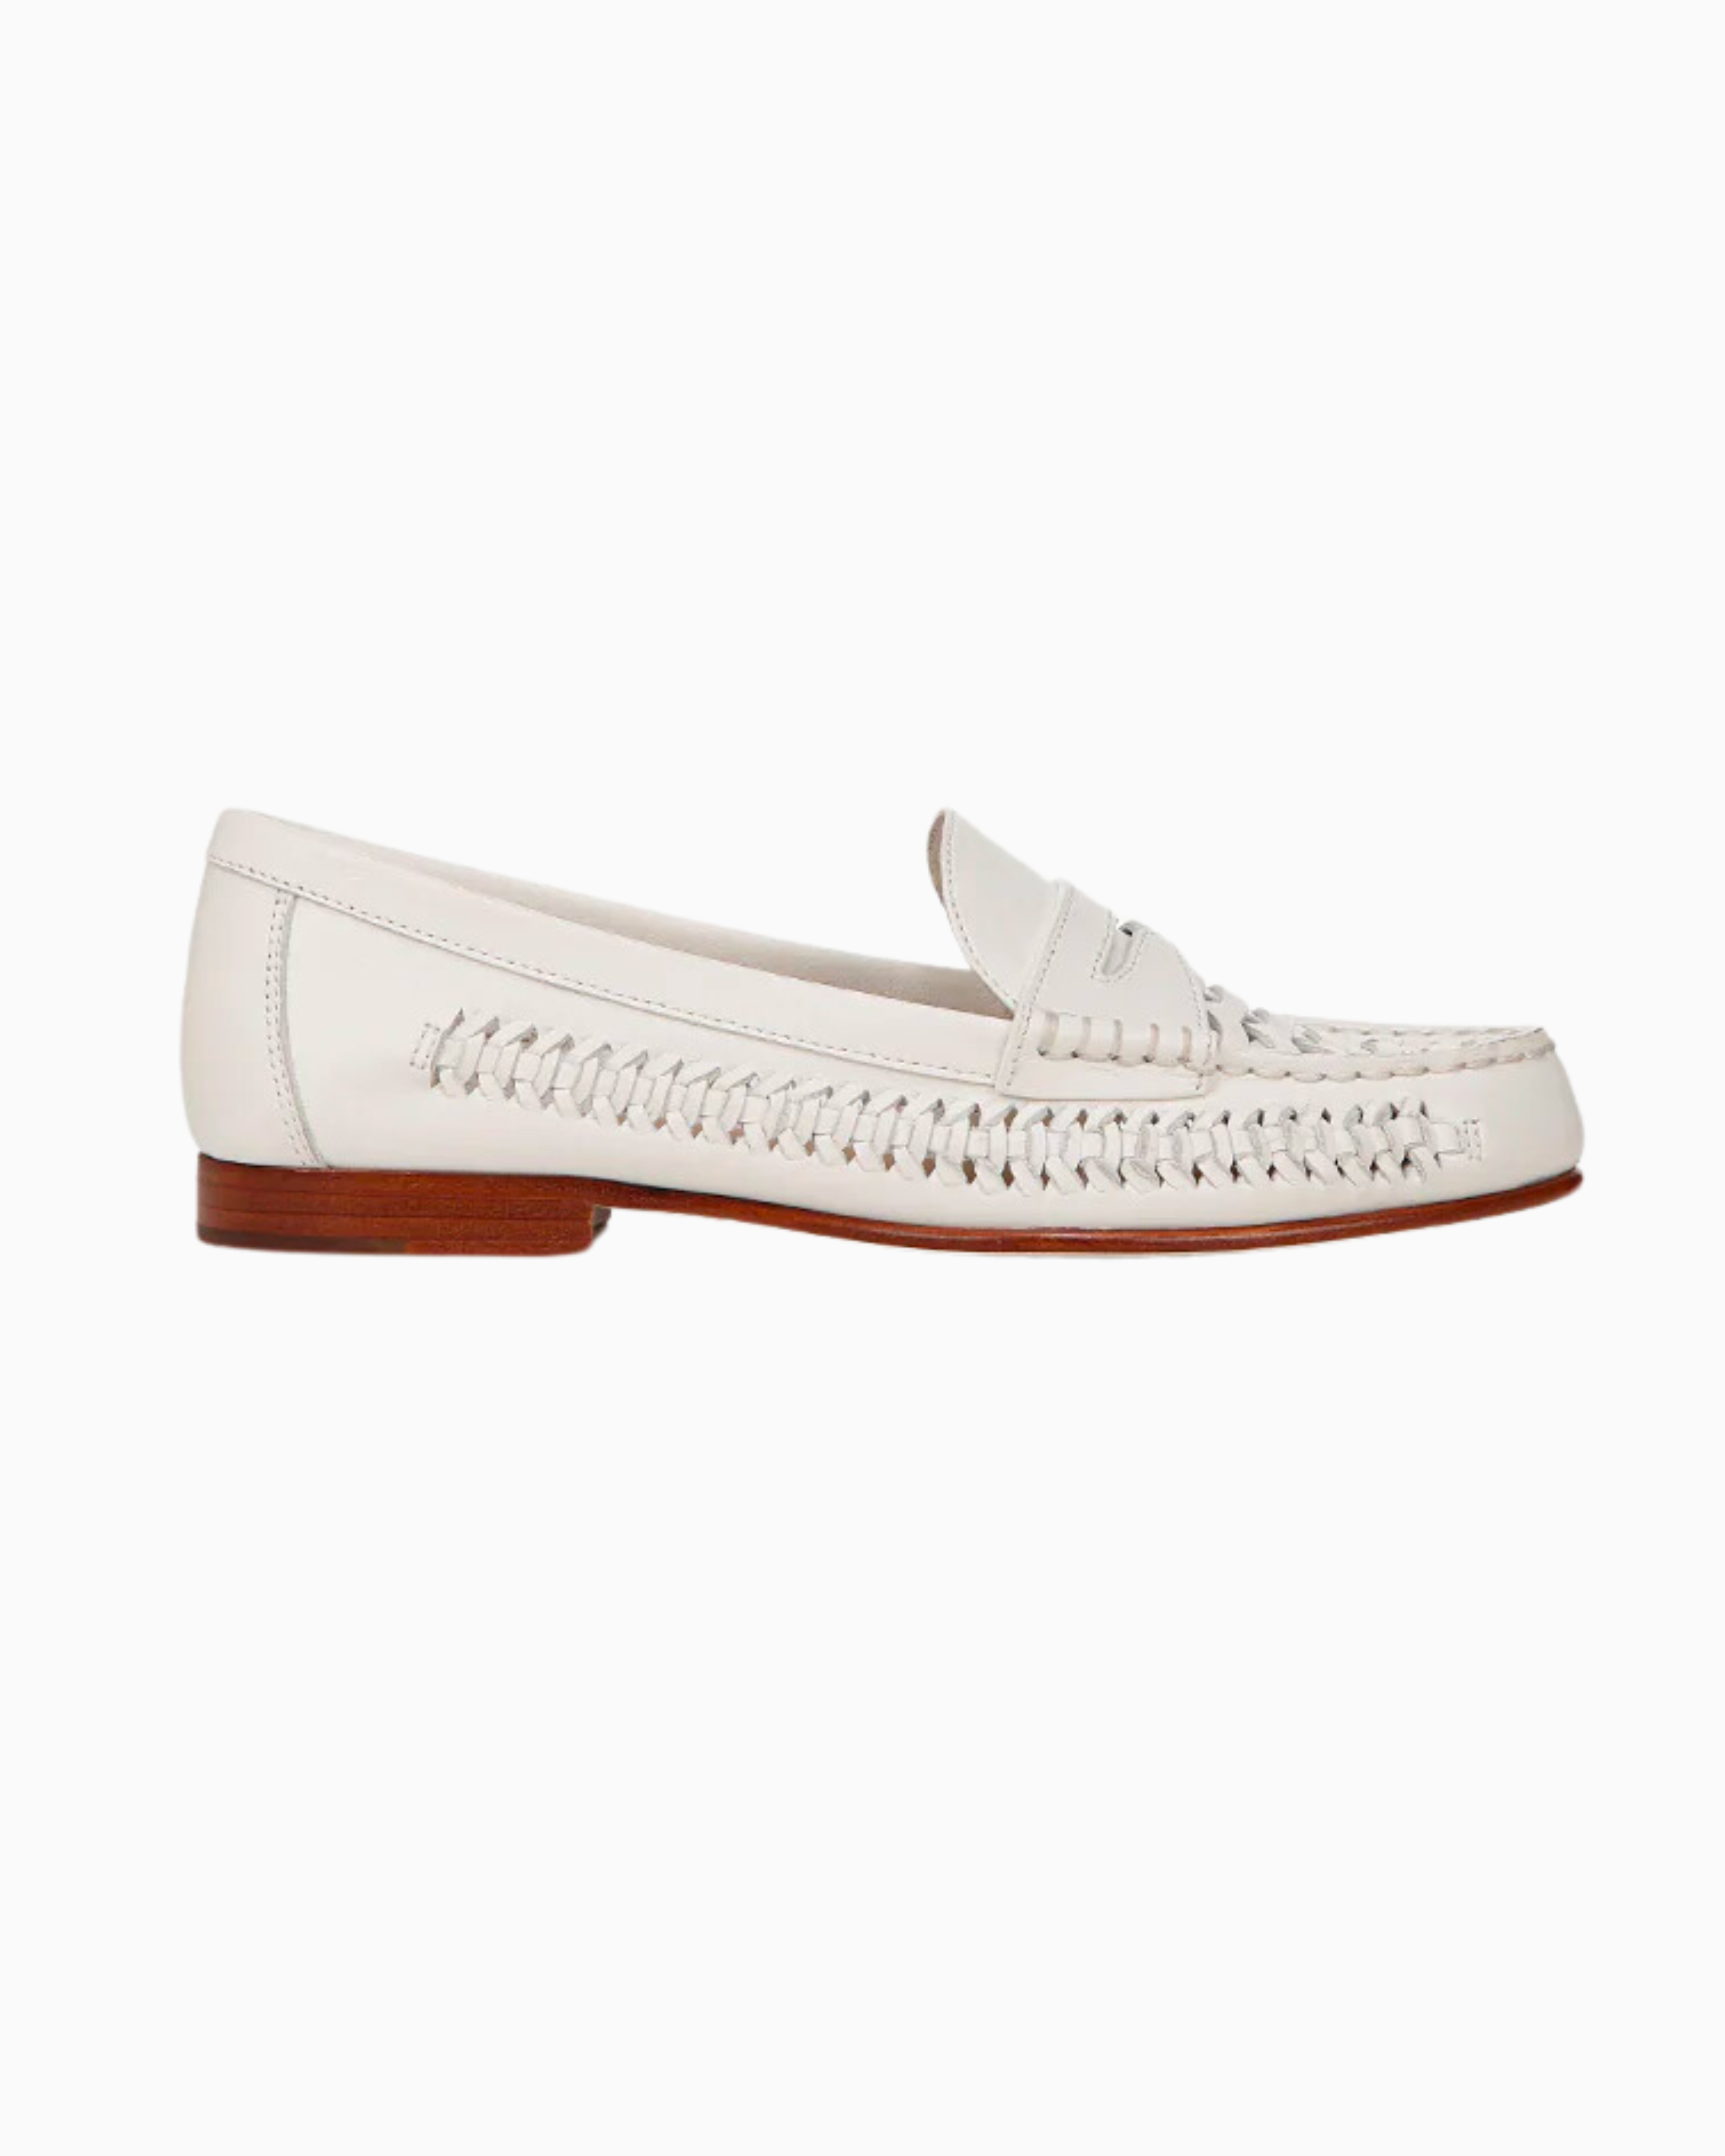 Veronica Beard Penny Woven Loafer in Coconut